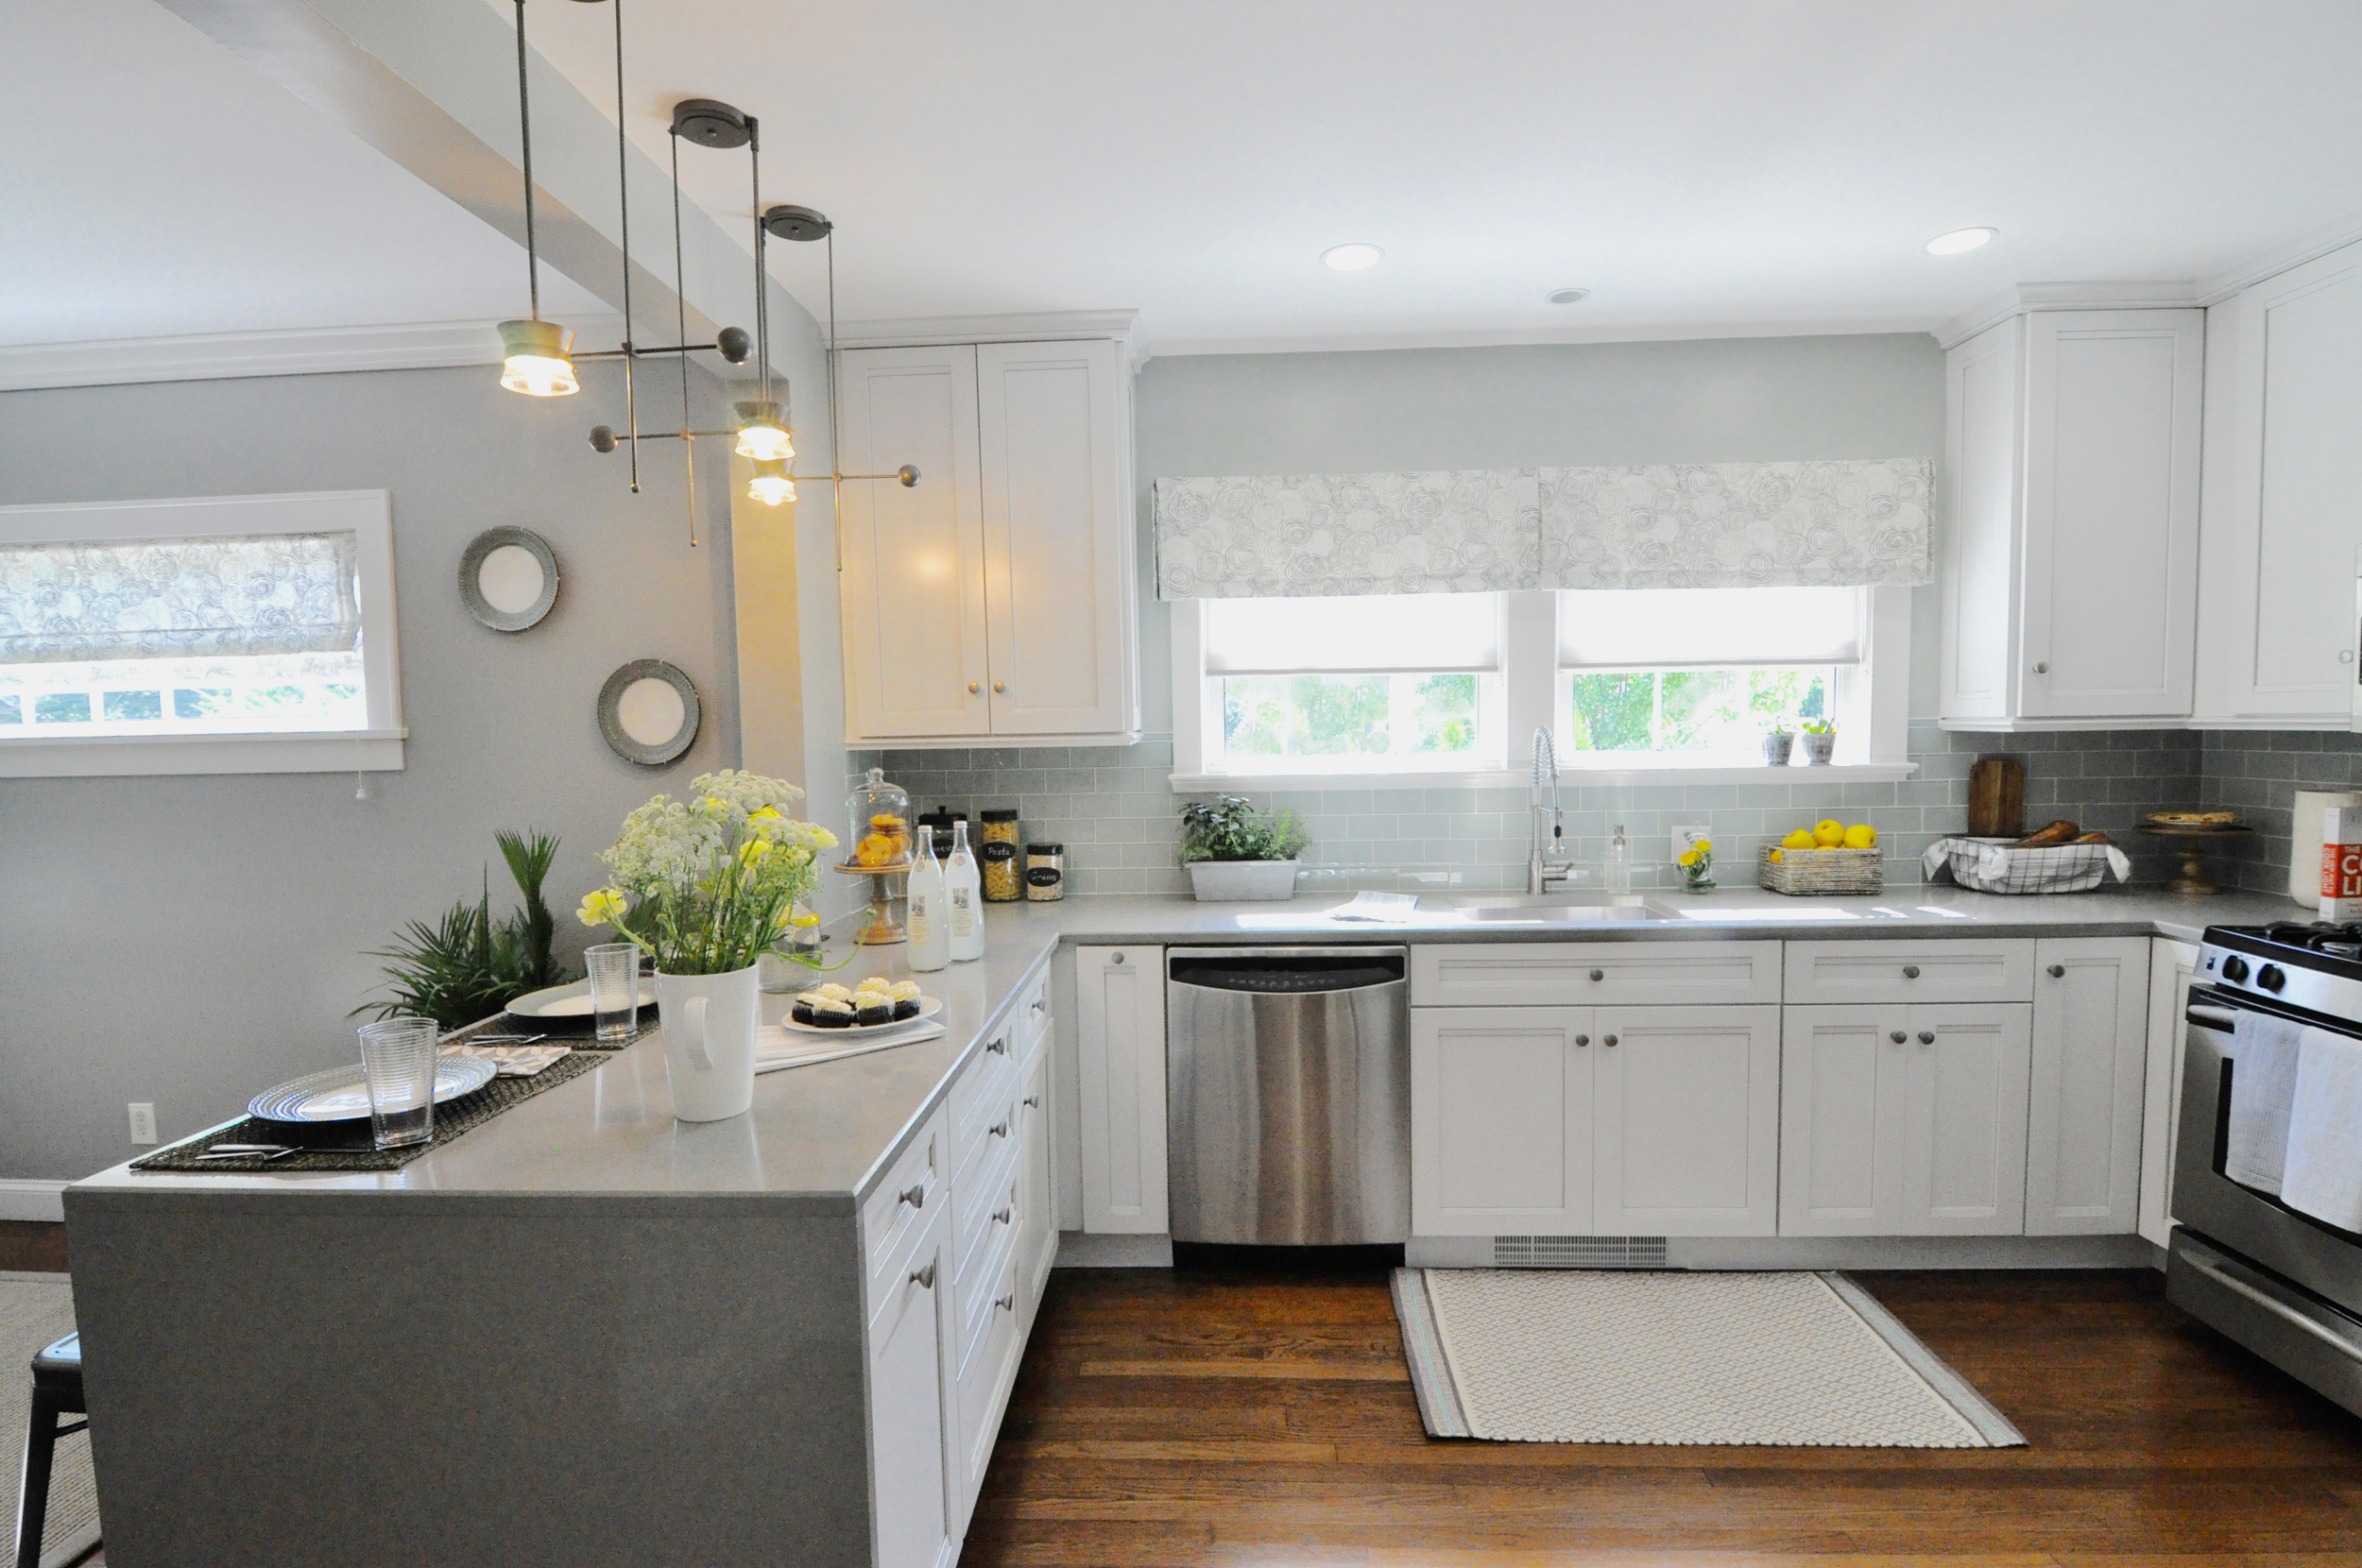 Kim Mitchell Design Lead_HGTV_Buying and Selling with The Property Brothers_Season 5_Episode 8_Kitchen Remodel_Sink_Peninsula_Modern Industrial Kitchen_Grey Kitchen_8_31_2016 airdate.jpg